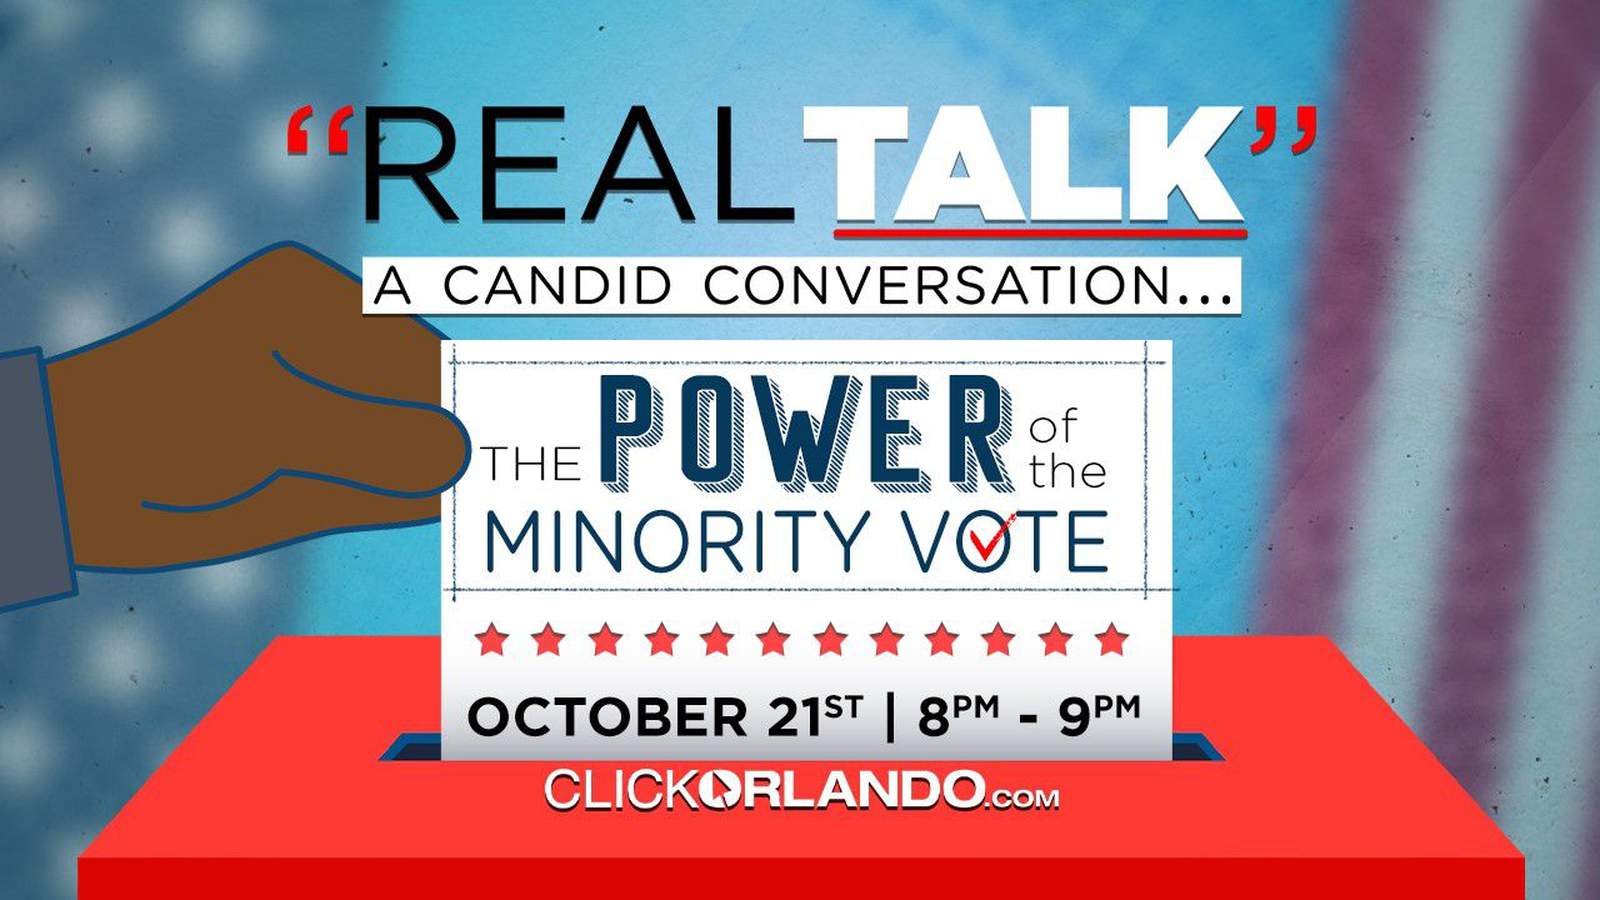 REWATCH: News 6 hosts Real Talk town hall on the power of the minority vote